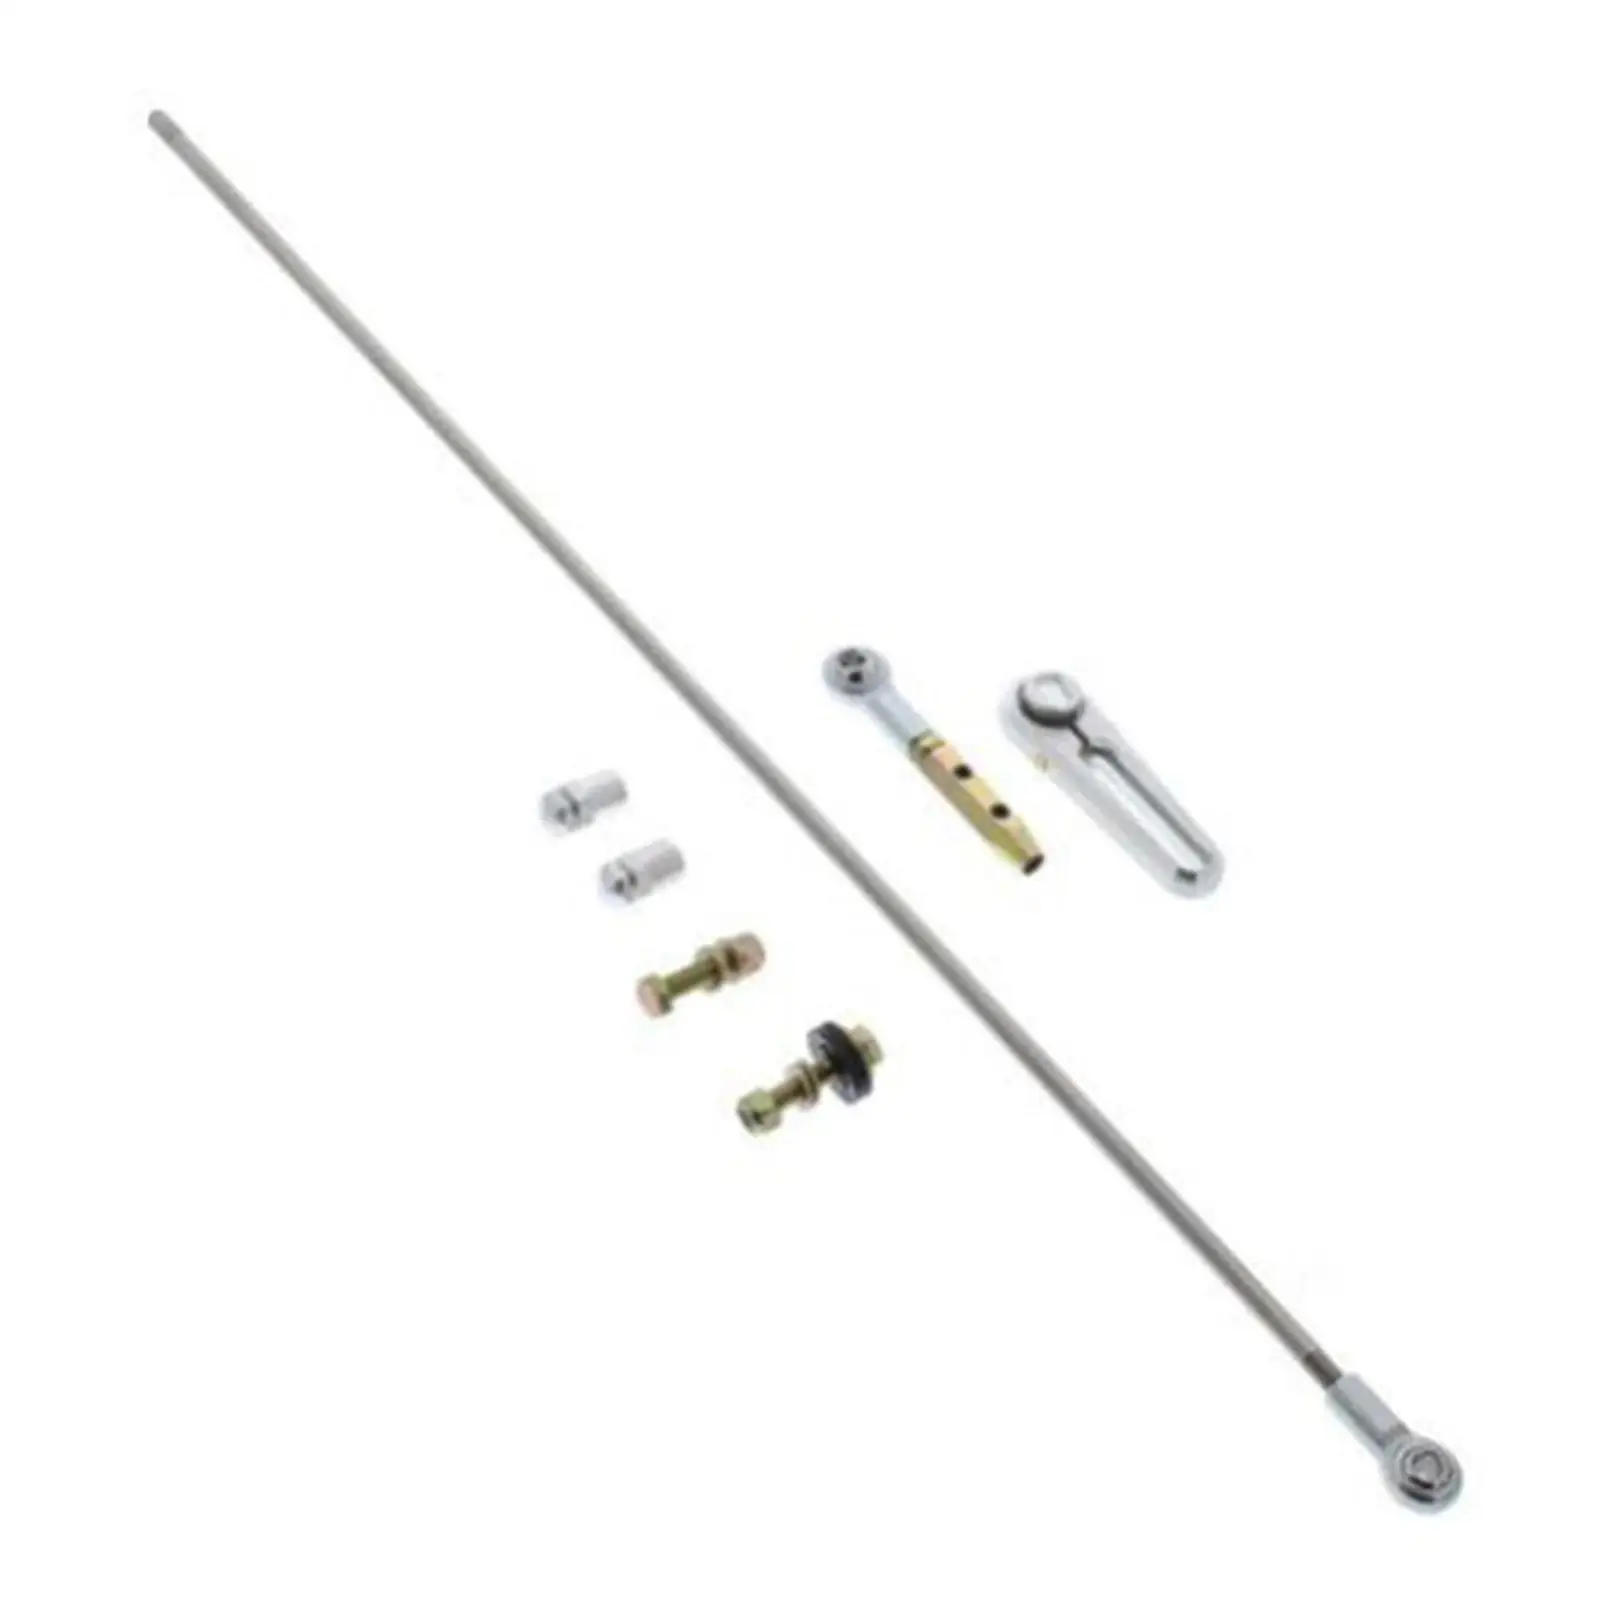 

Transmission Column Shift Linkage Kit Easily Install Adjustable High Performance Car Accessories Replaces for GM 700R4 4L60